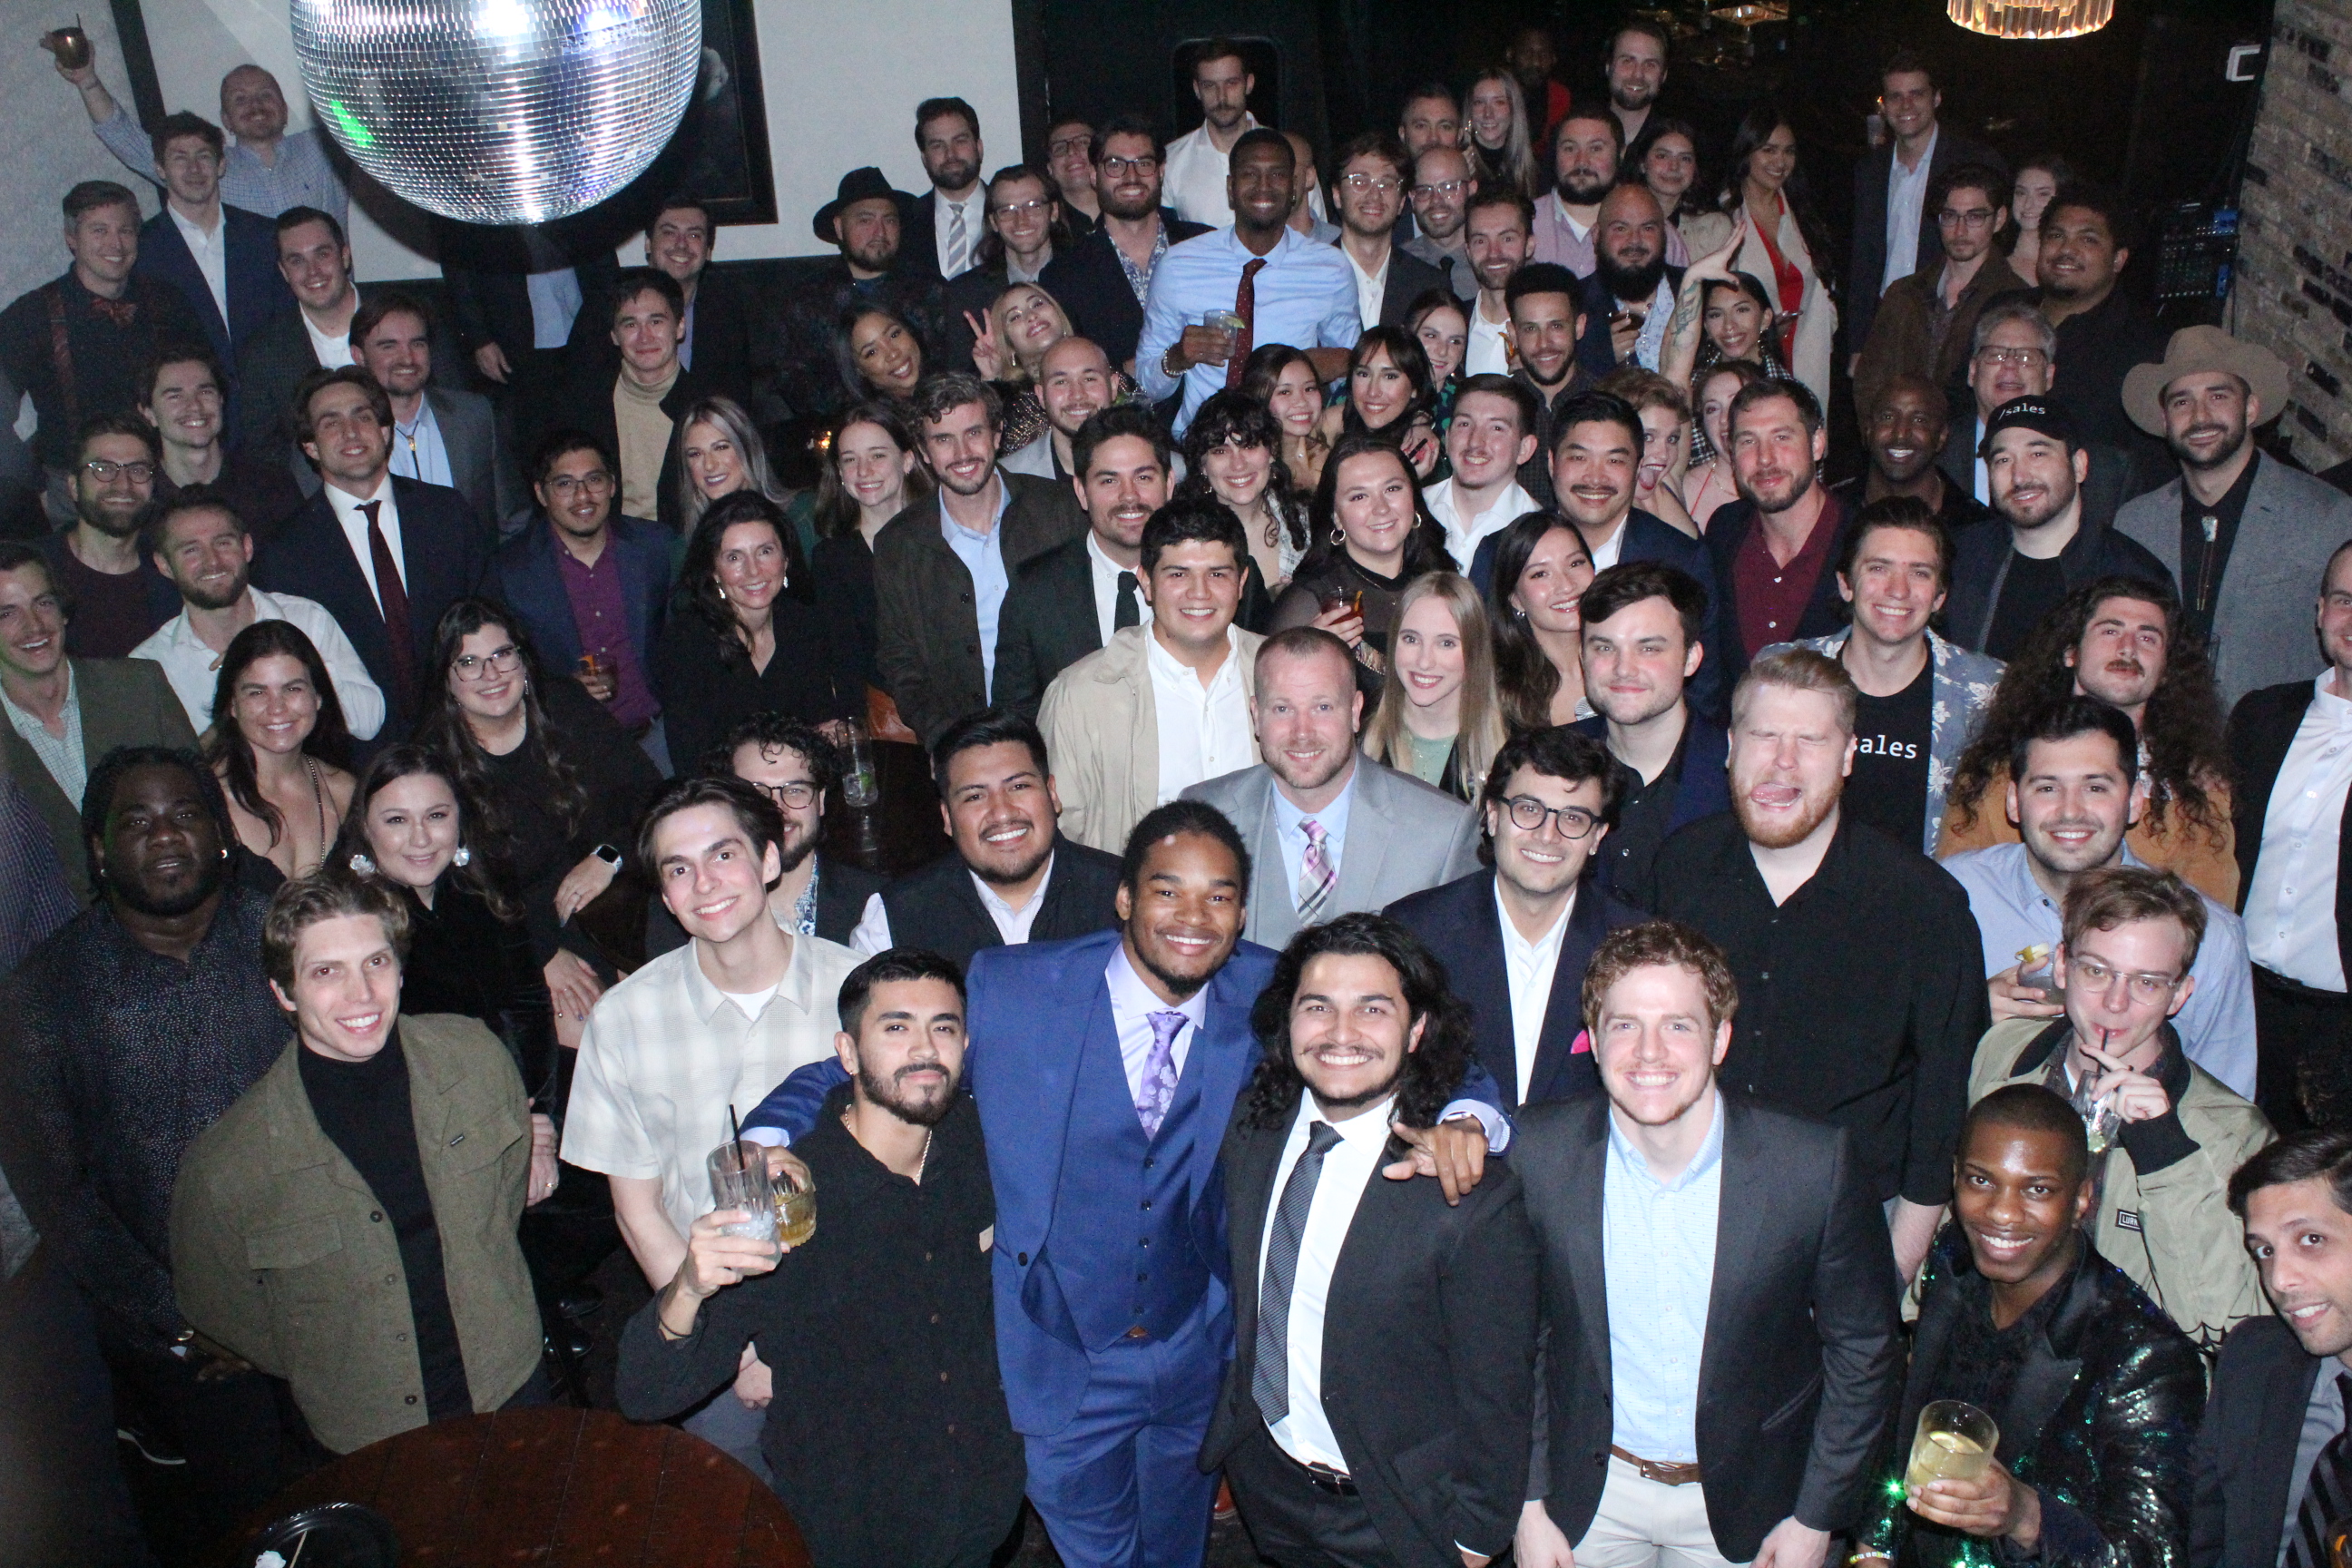 getsales' 2022 holiday party team photo